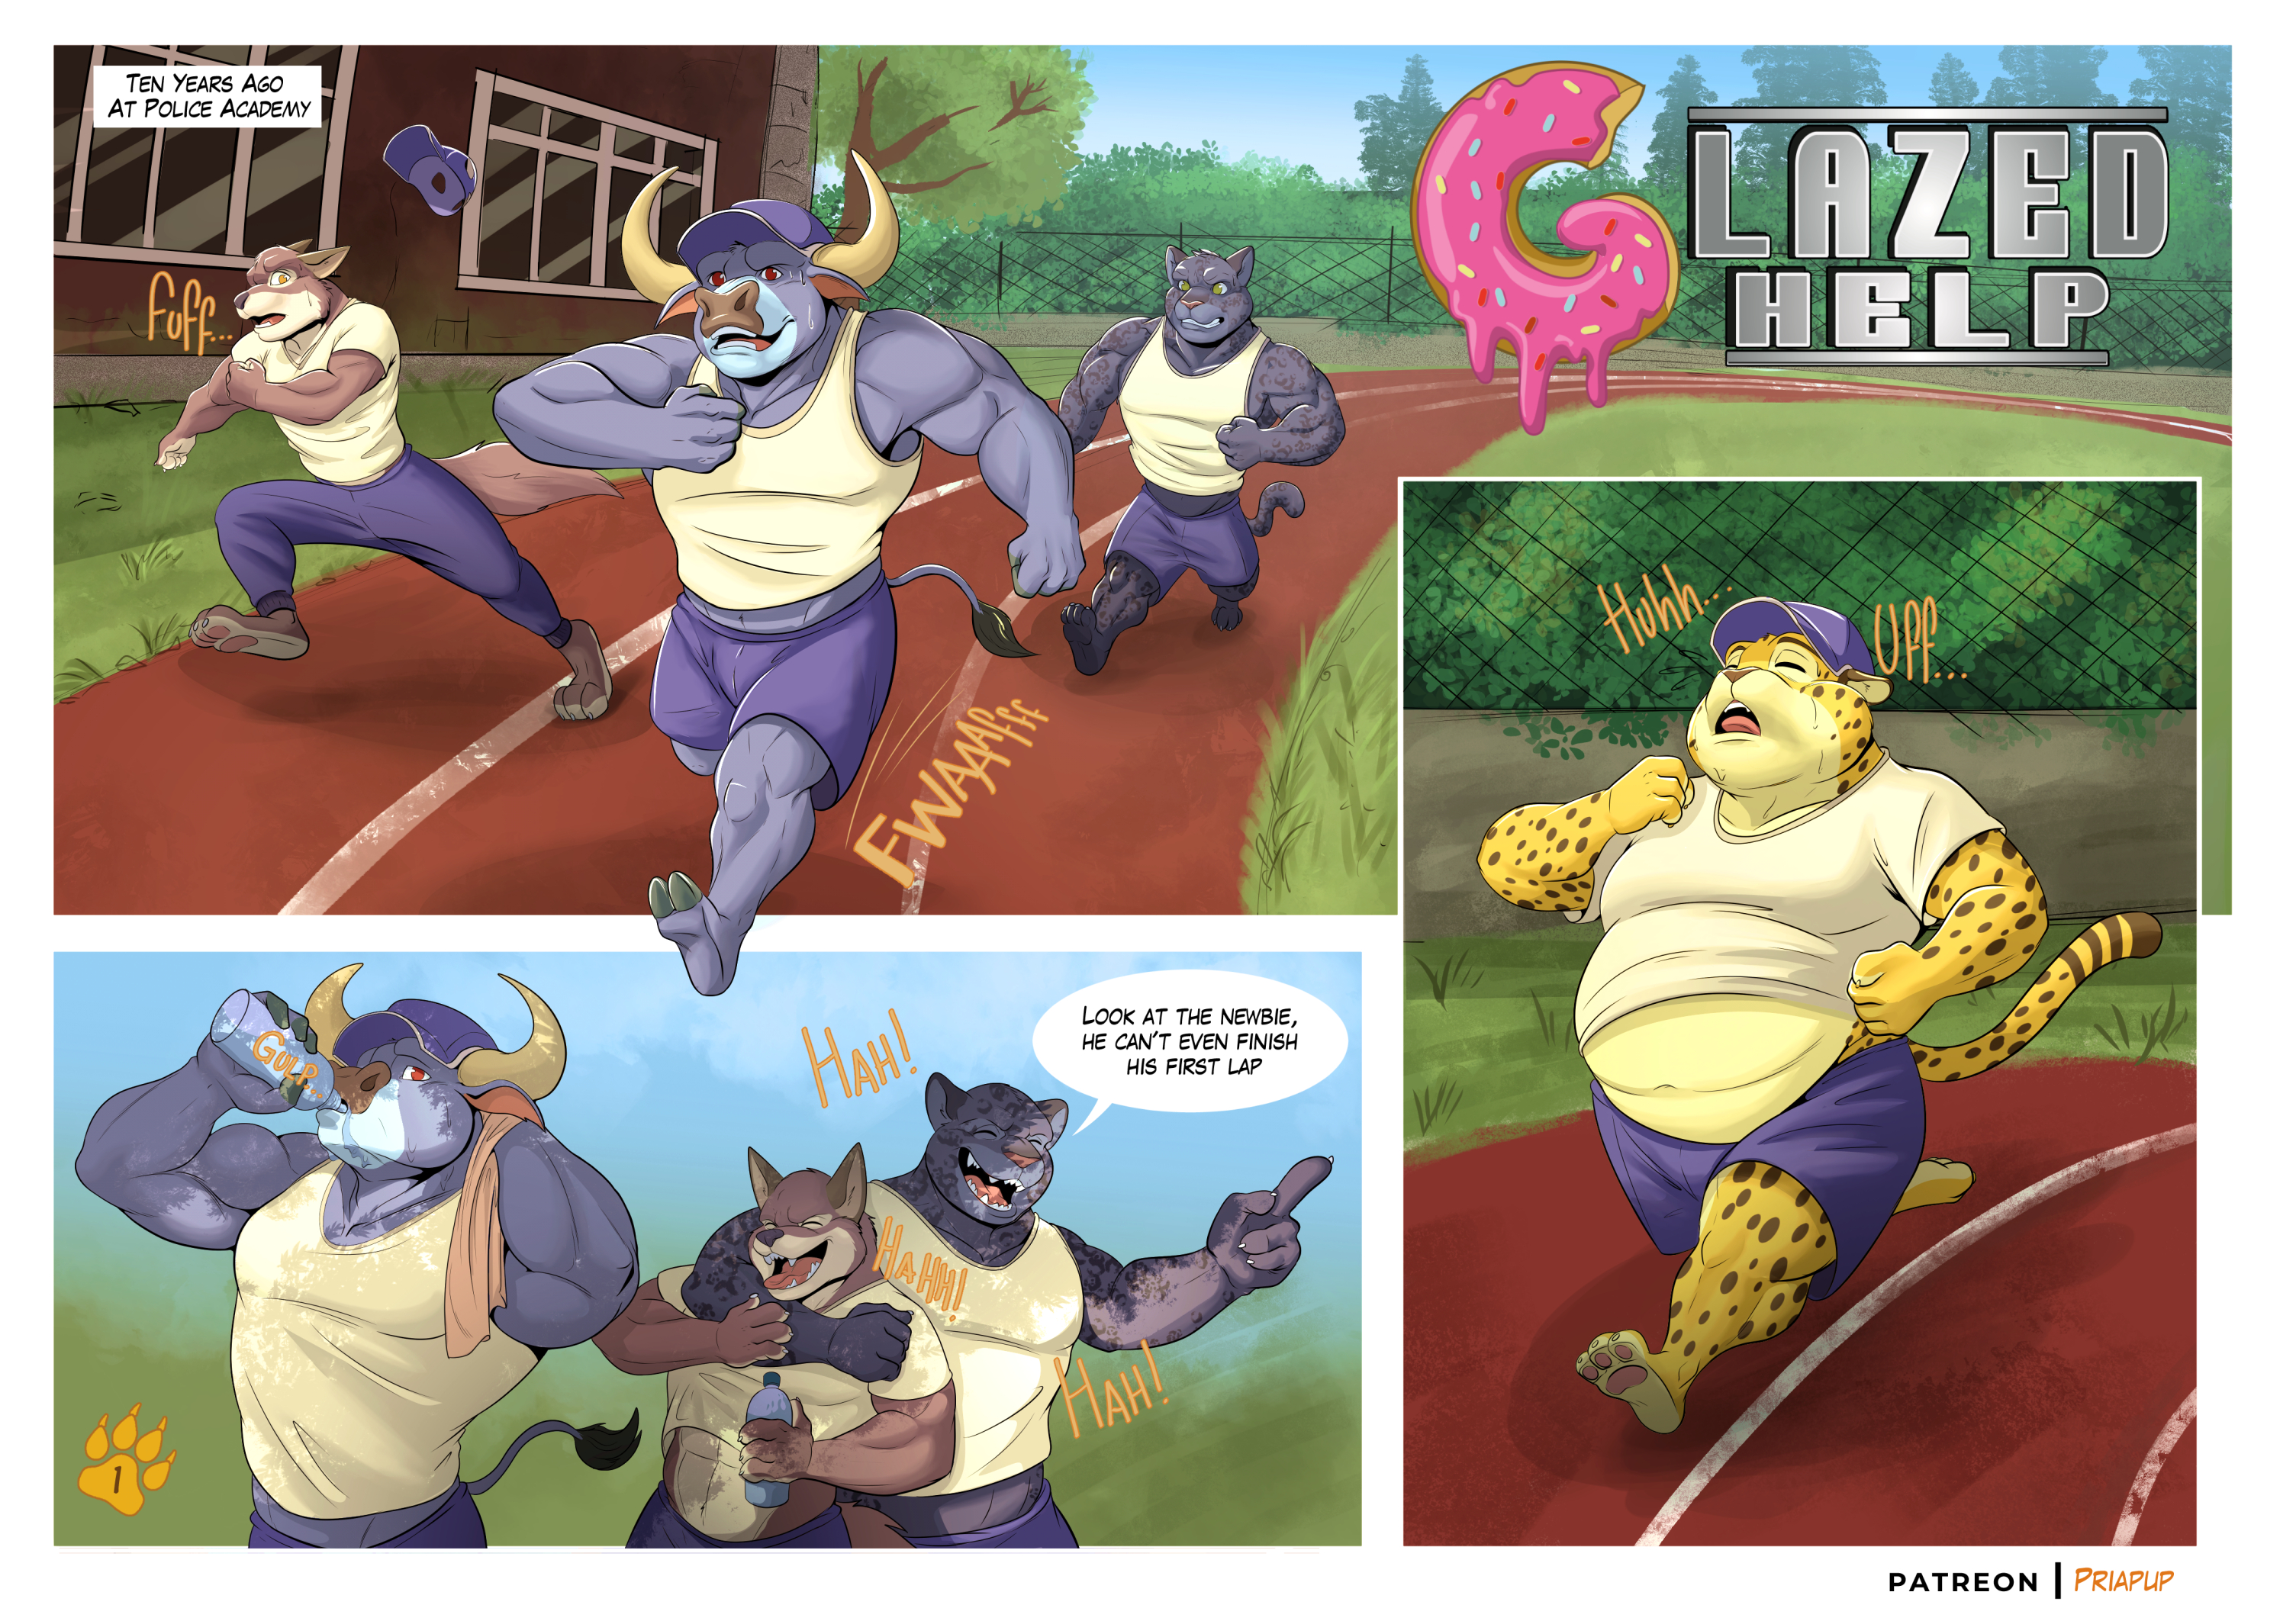 GLAZED HELP | Page 01 by Priapup < Submission | Inkbunny, the Furry Art  Community